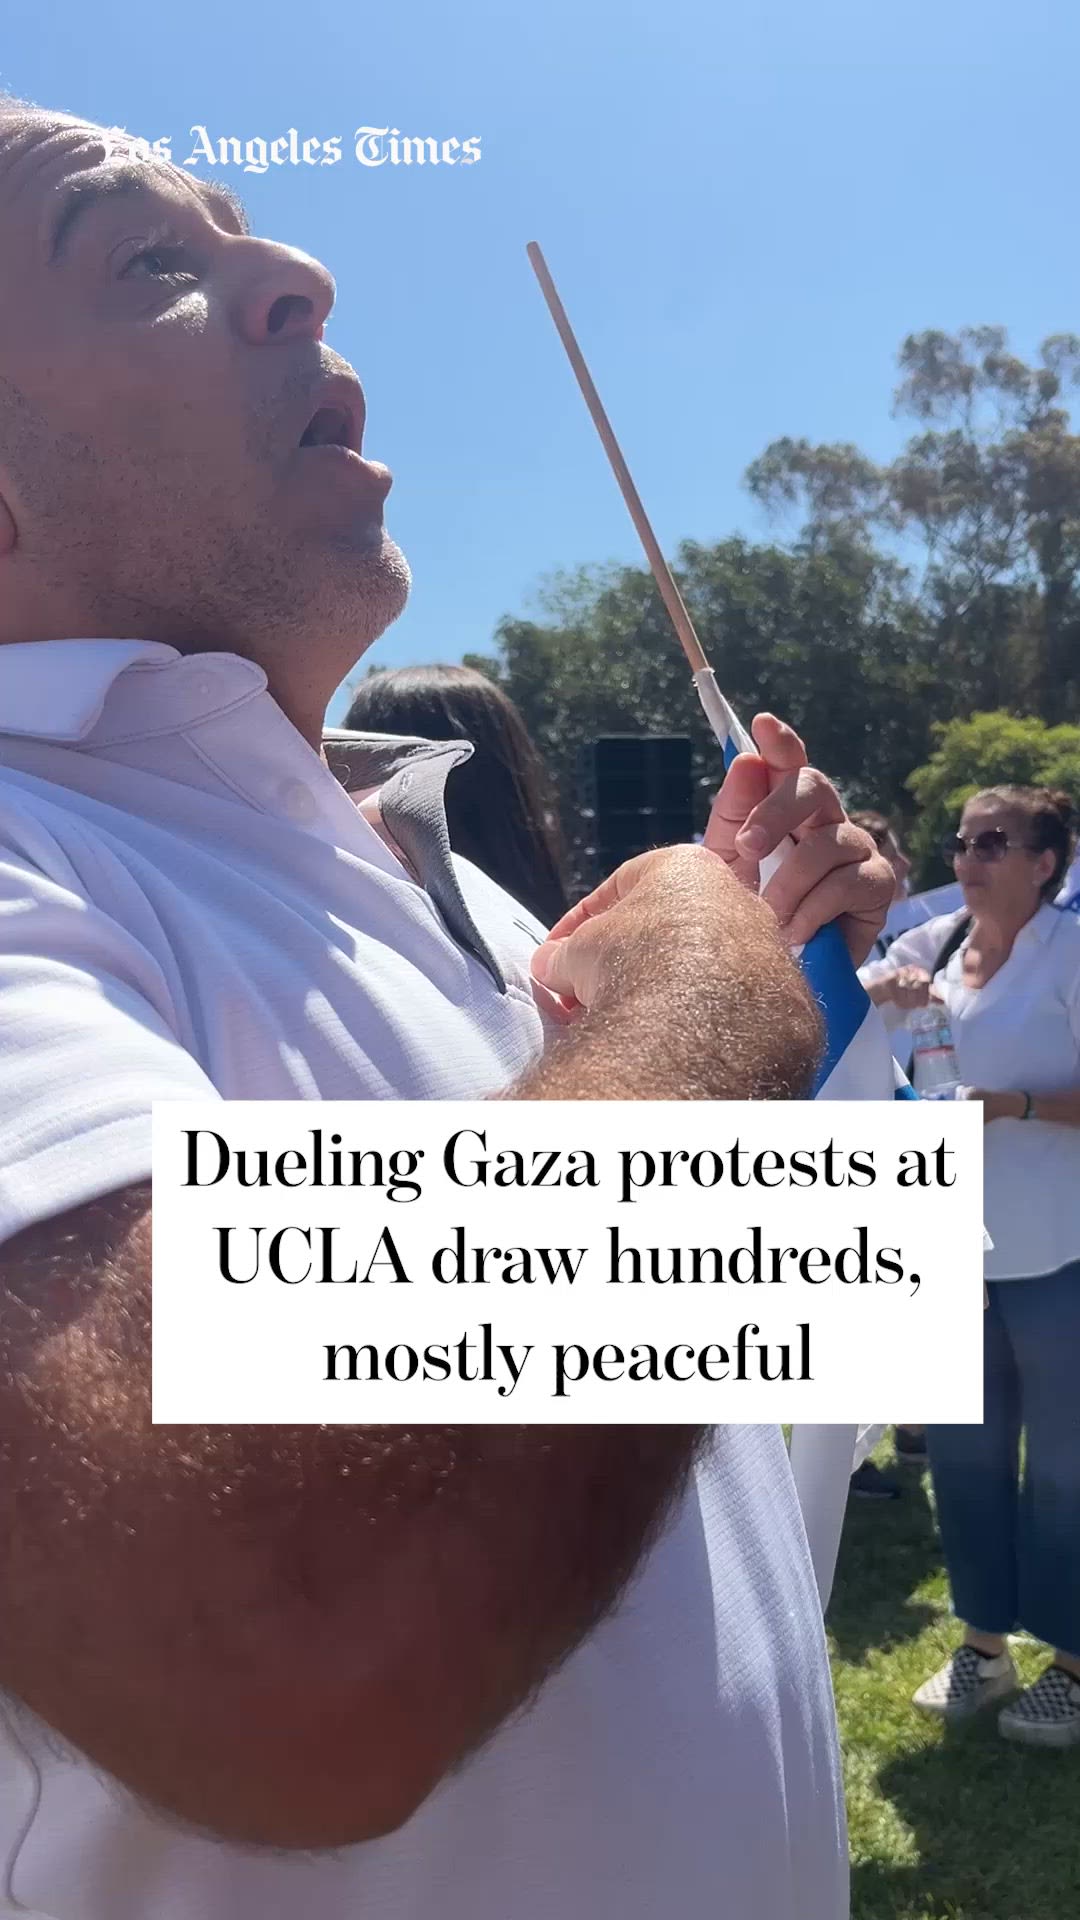 Dueling Gaza protests at UCLA draw hundreds, mostly peaceful